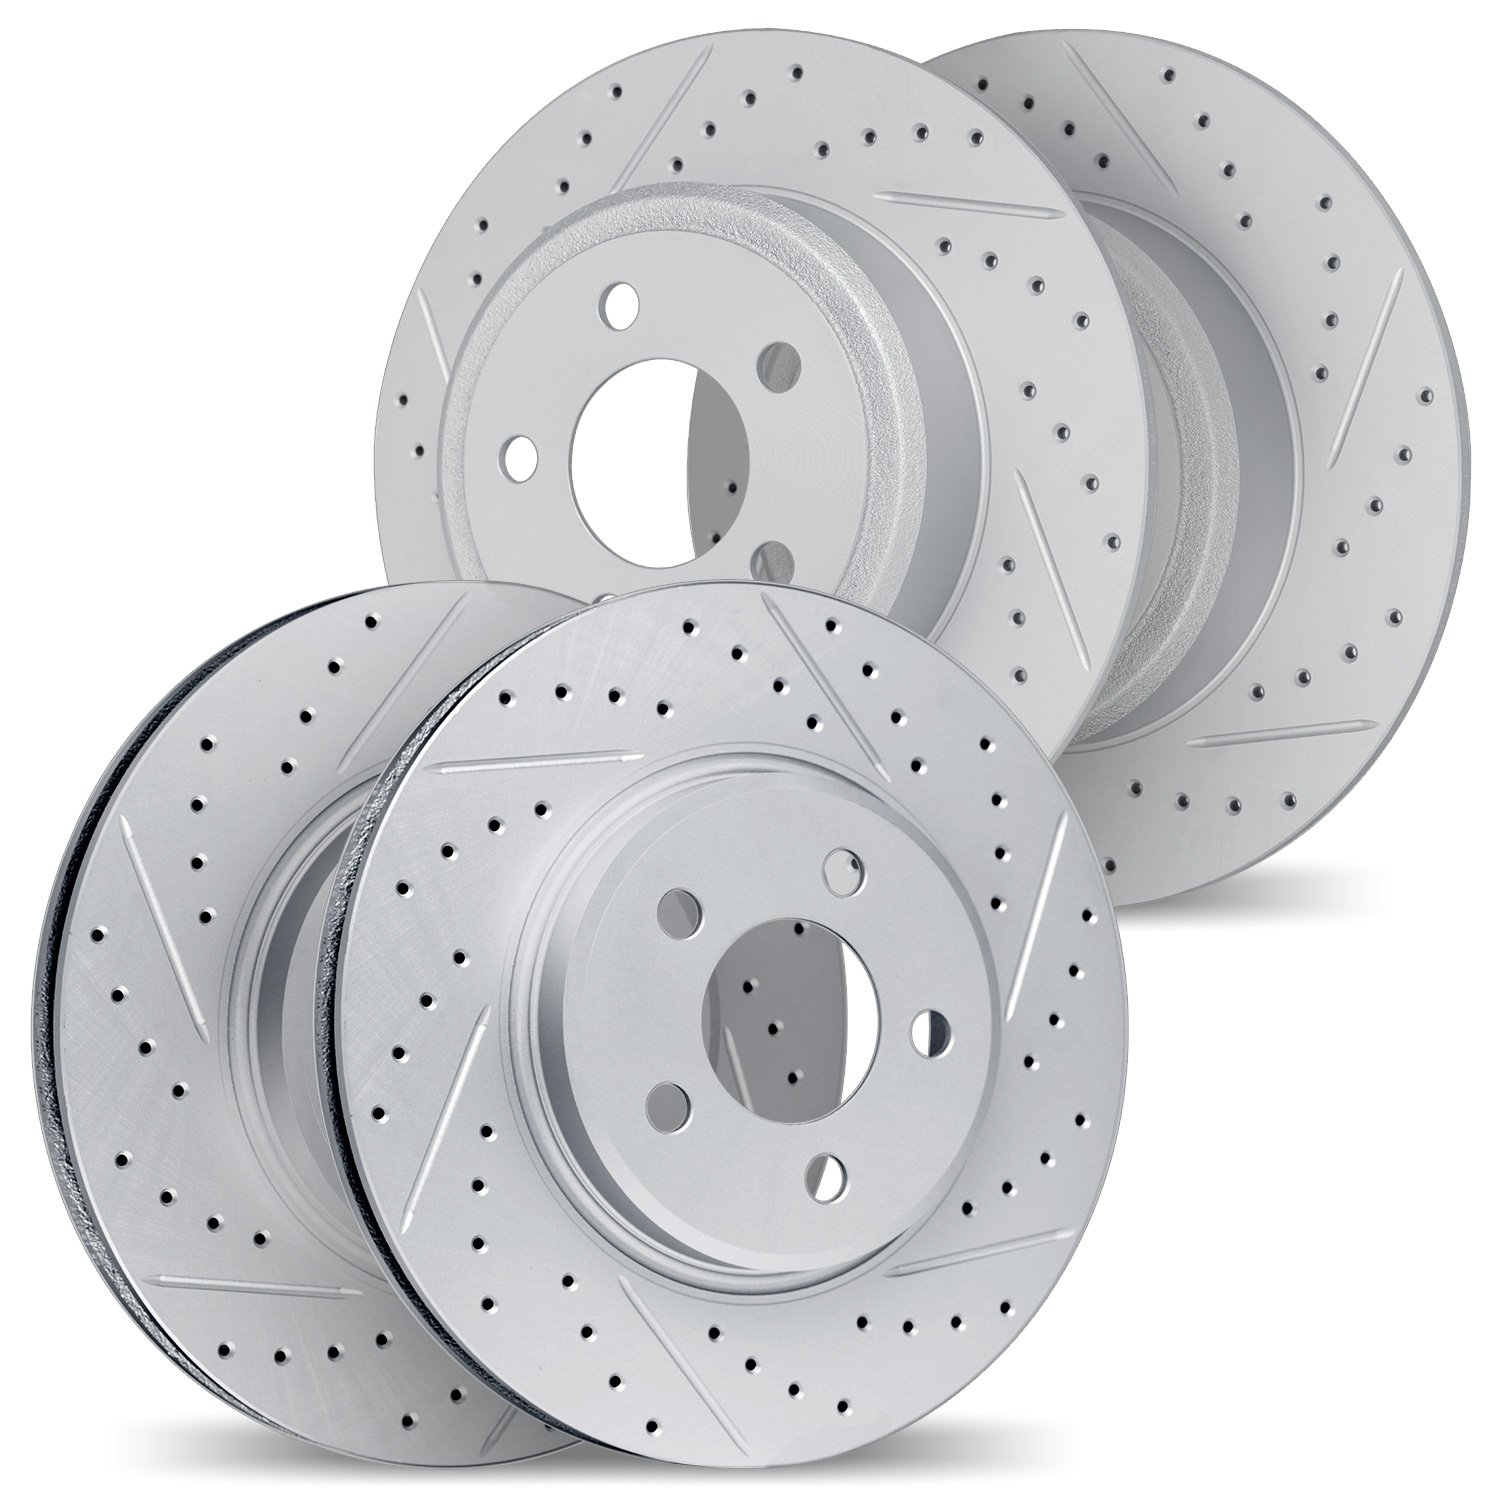 2004-20000 Geoperformance Drilled/Slotted Brake Rotors, 2001-2008 Multiple Makes/Models, Position: Front and Rear